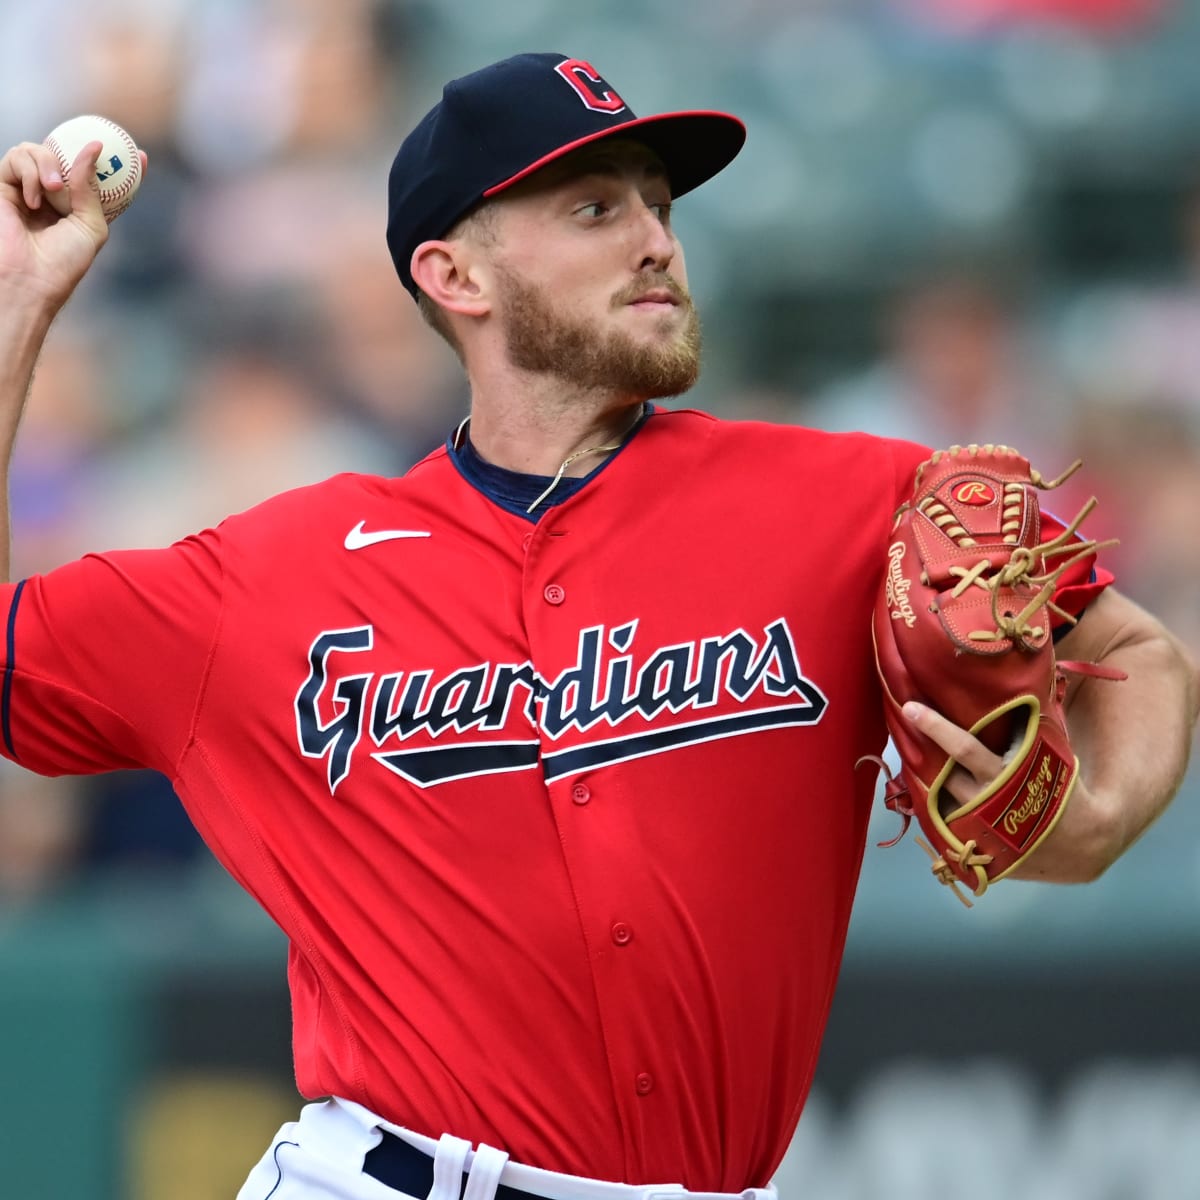 Guardians rookie pitchers impress, try to keep team's playoff